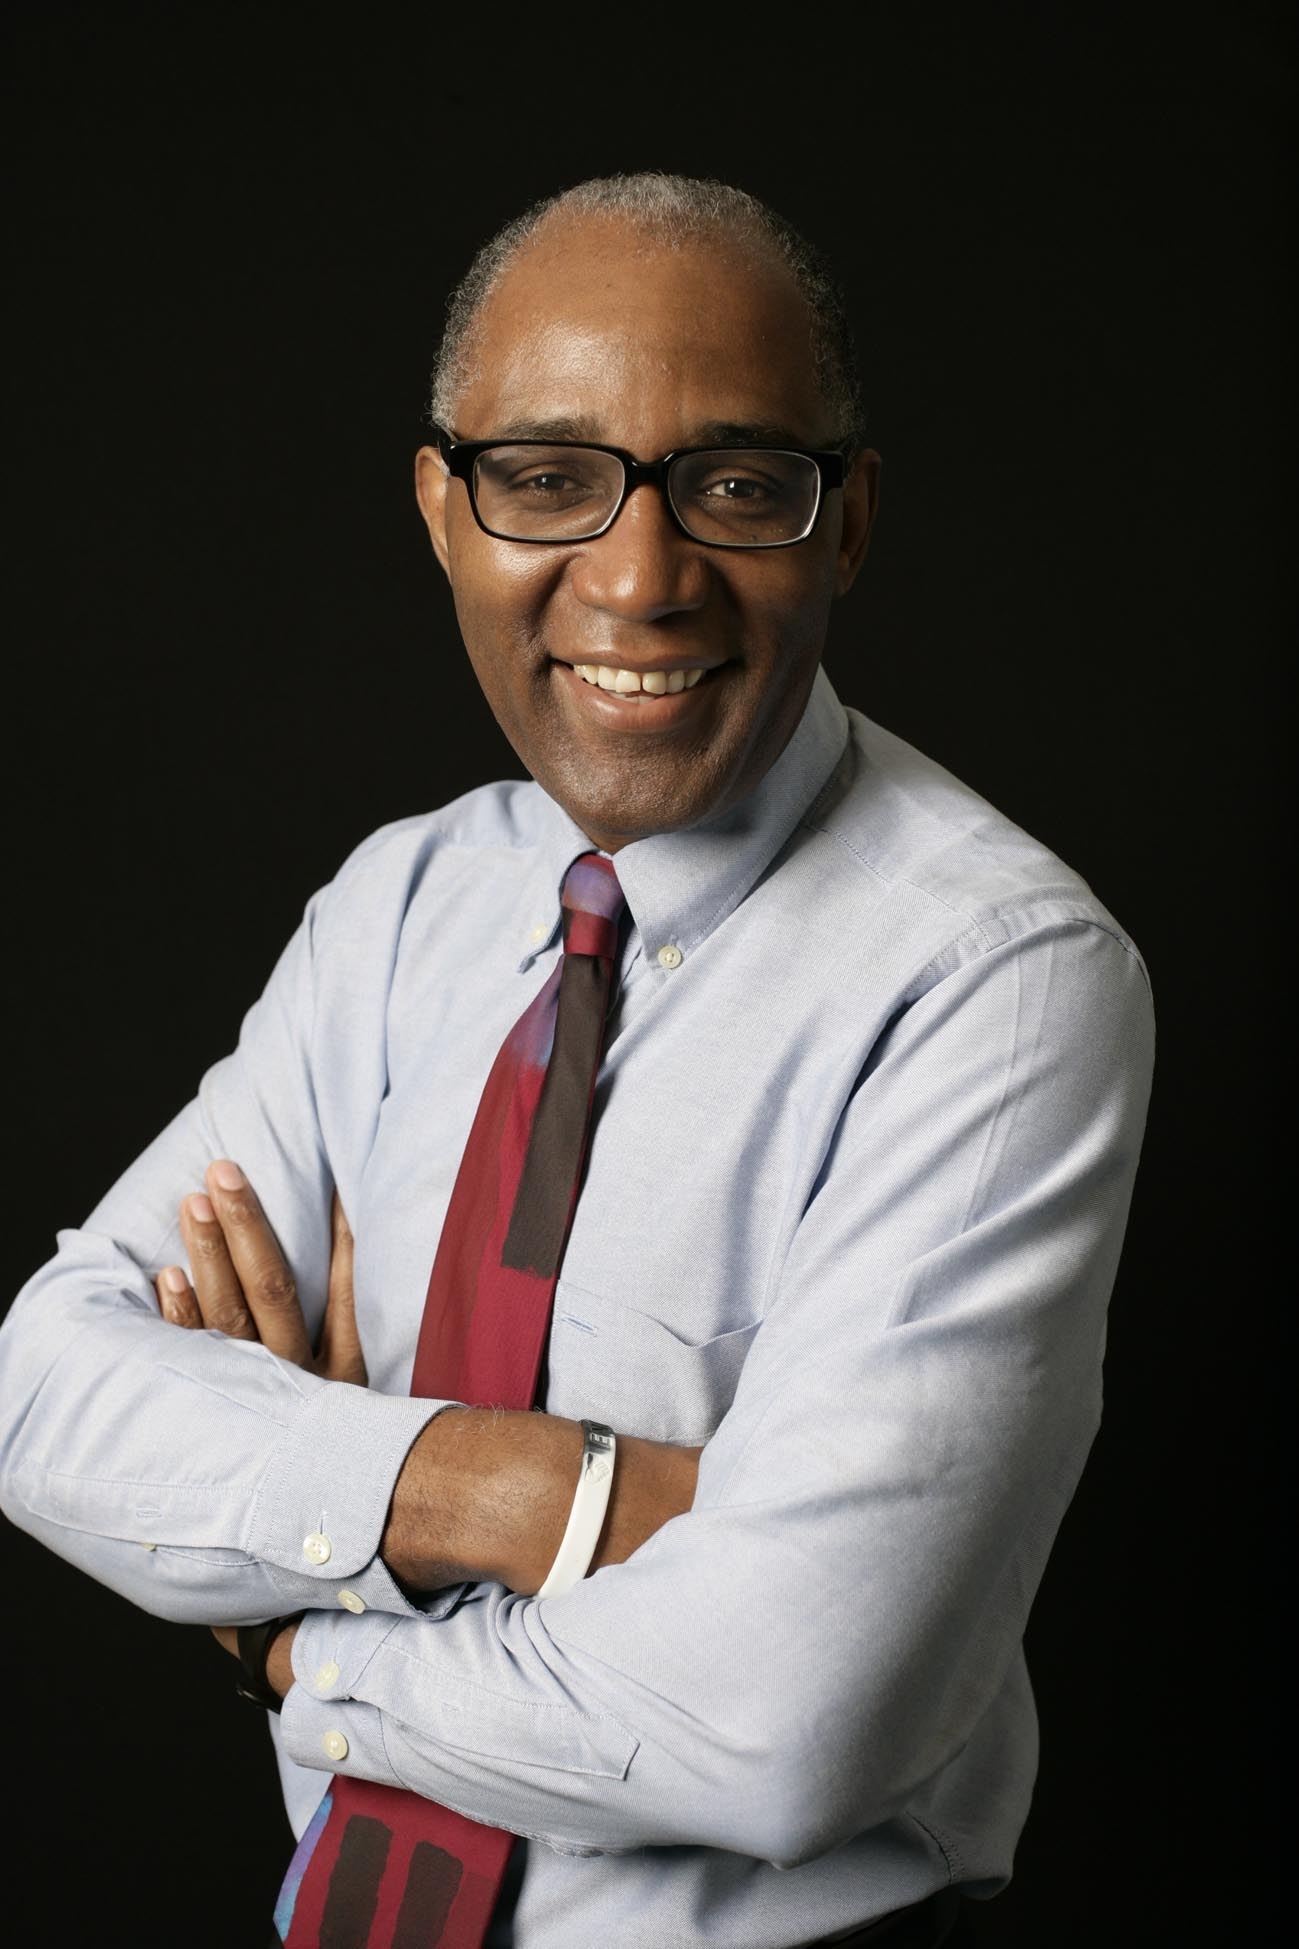 A photo of Trevor Phillips, Trustee at enei